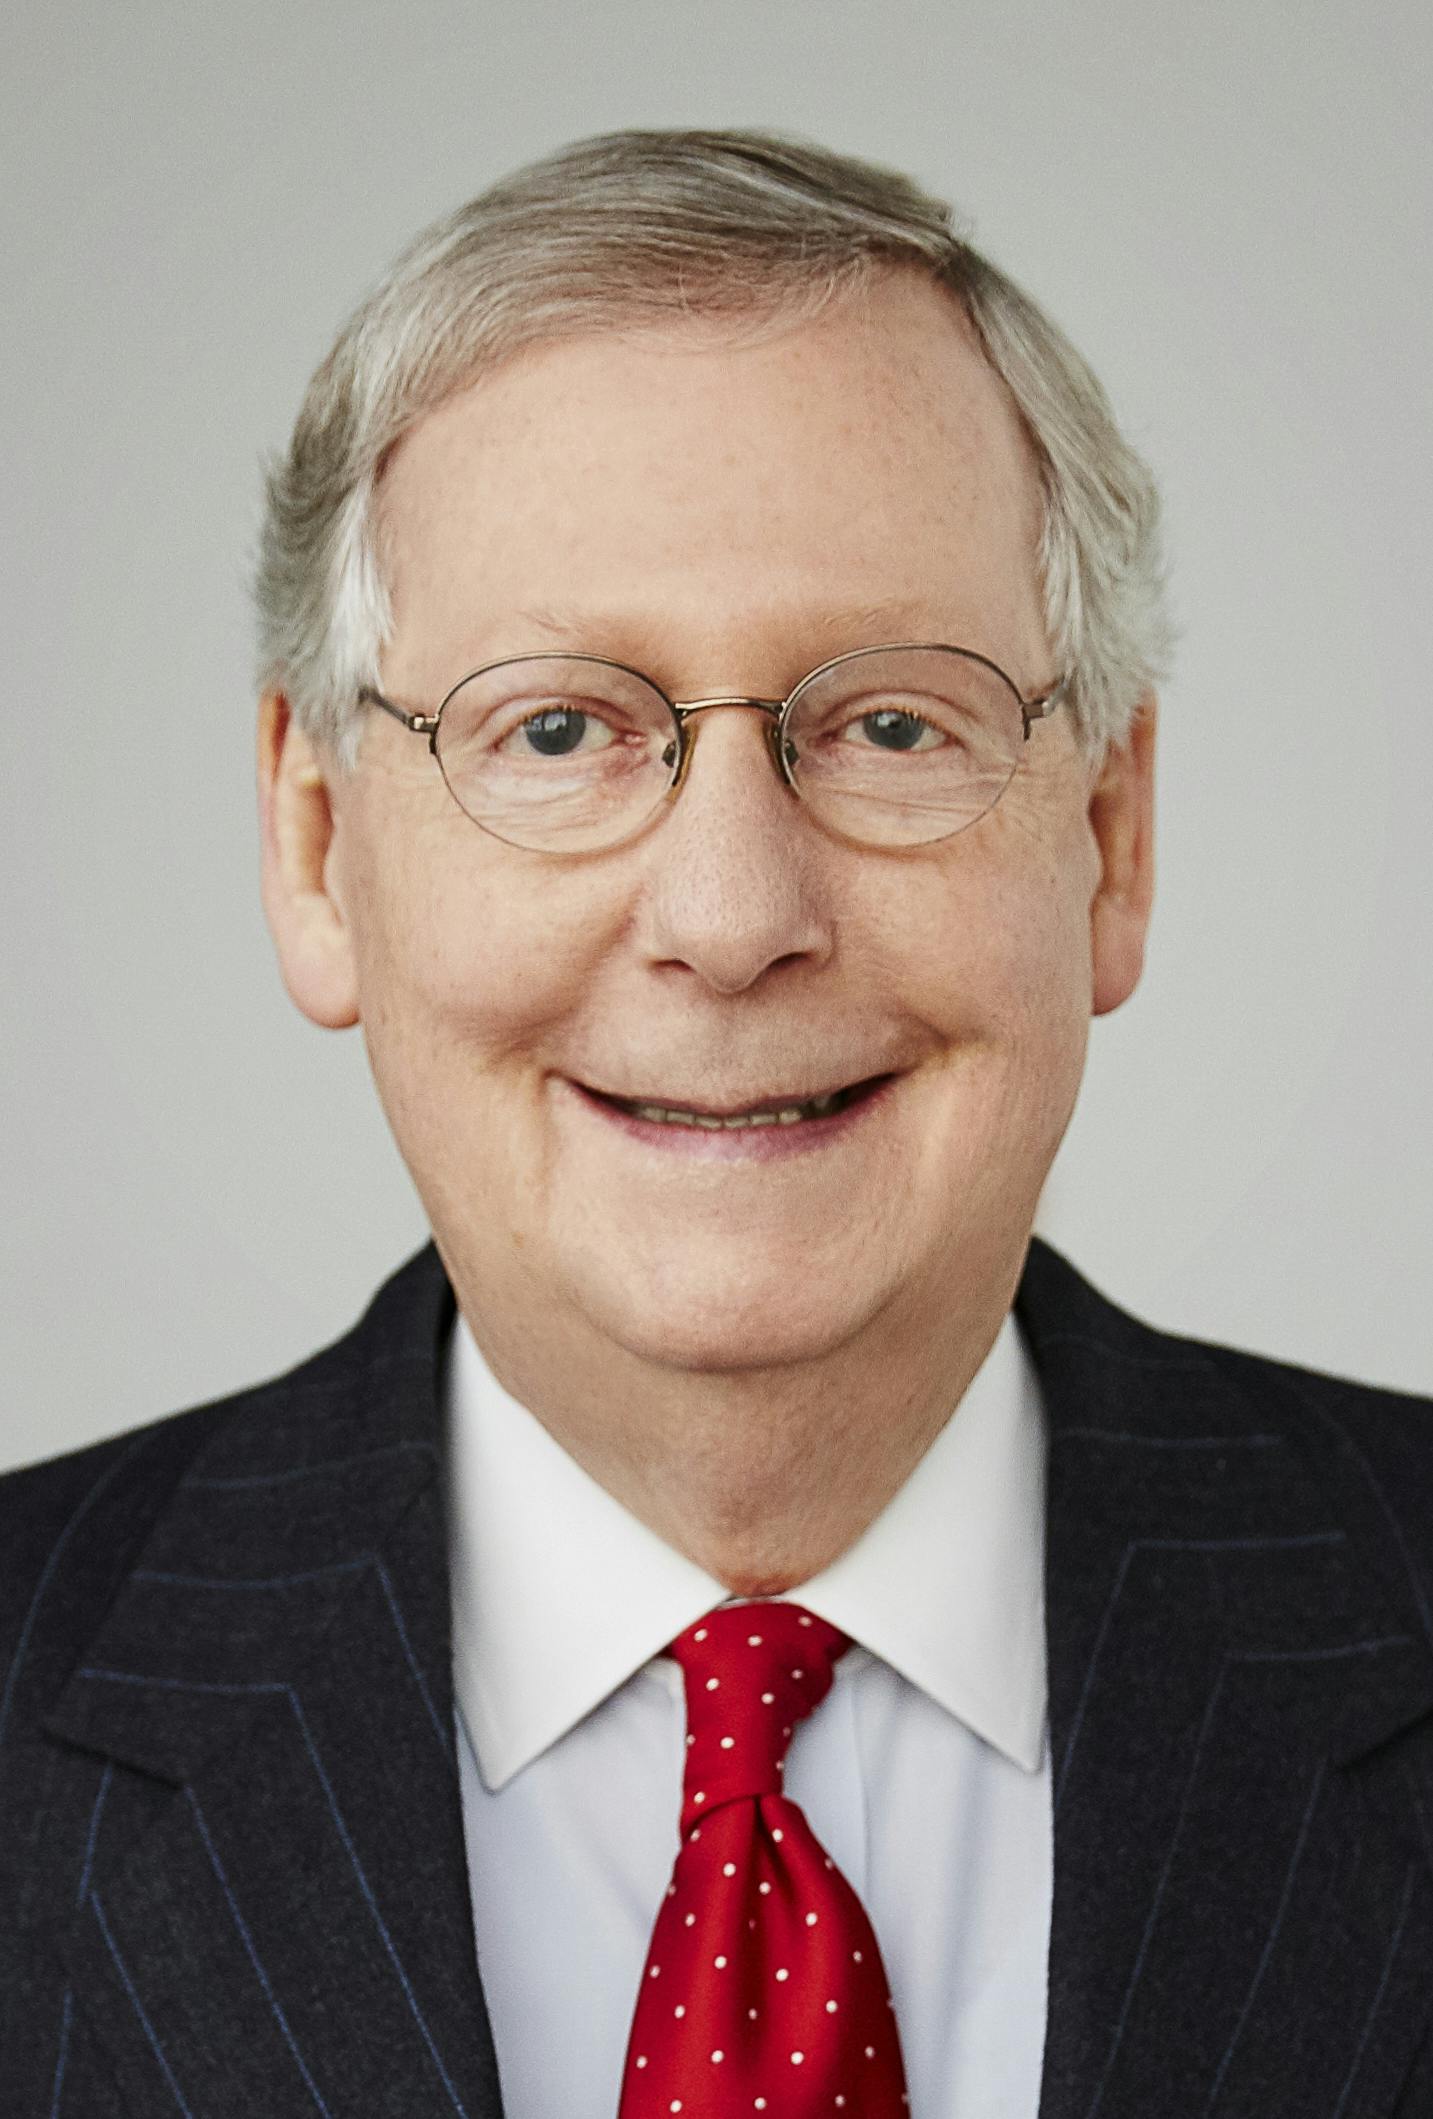 Profile picture of Mitch McConnell